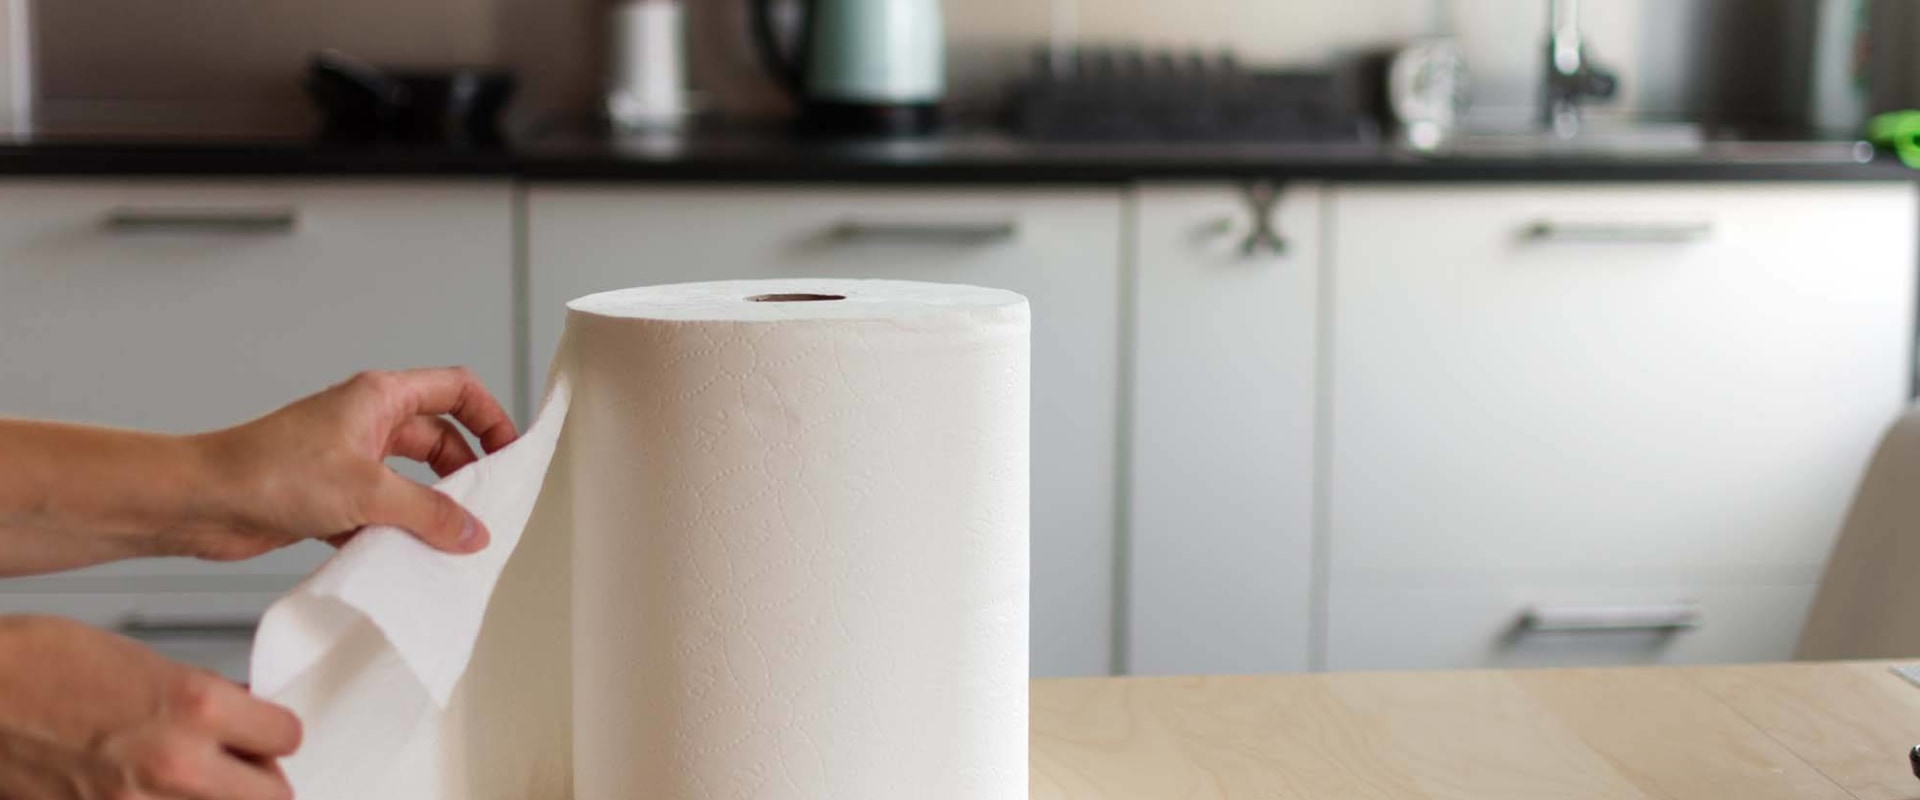 Can kitchen roll be recycled?